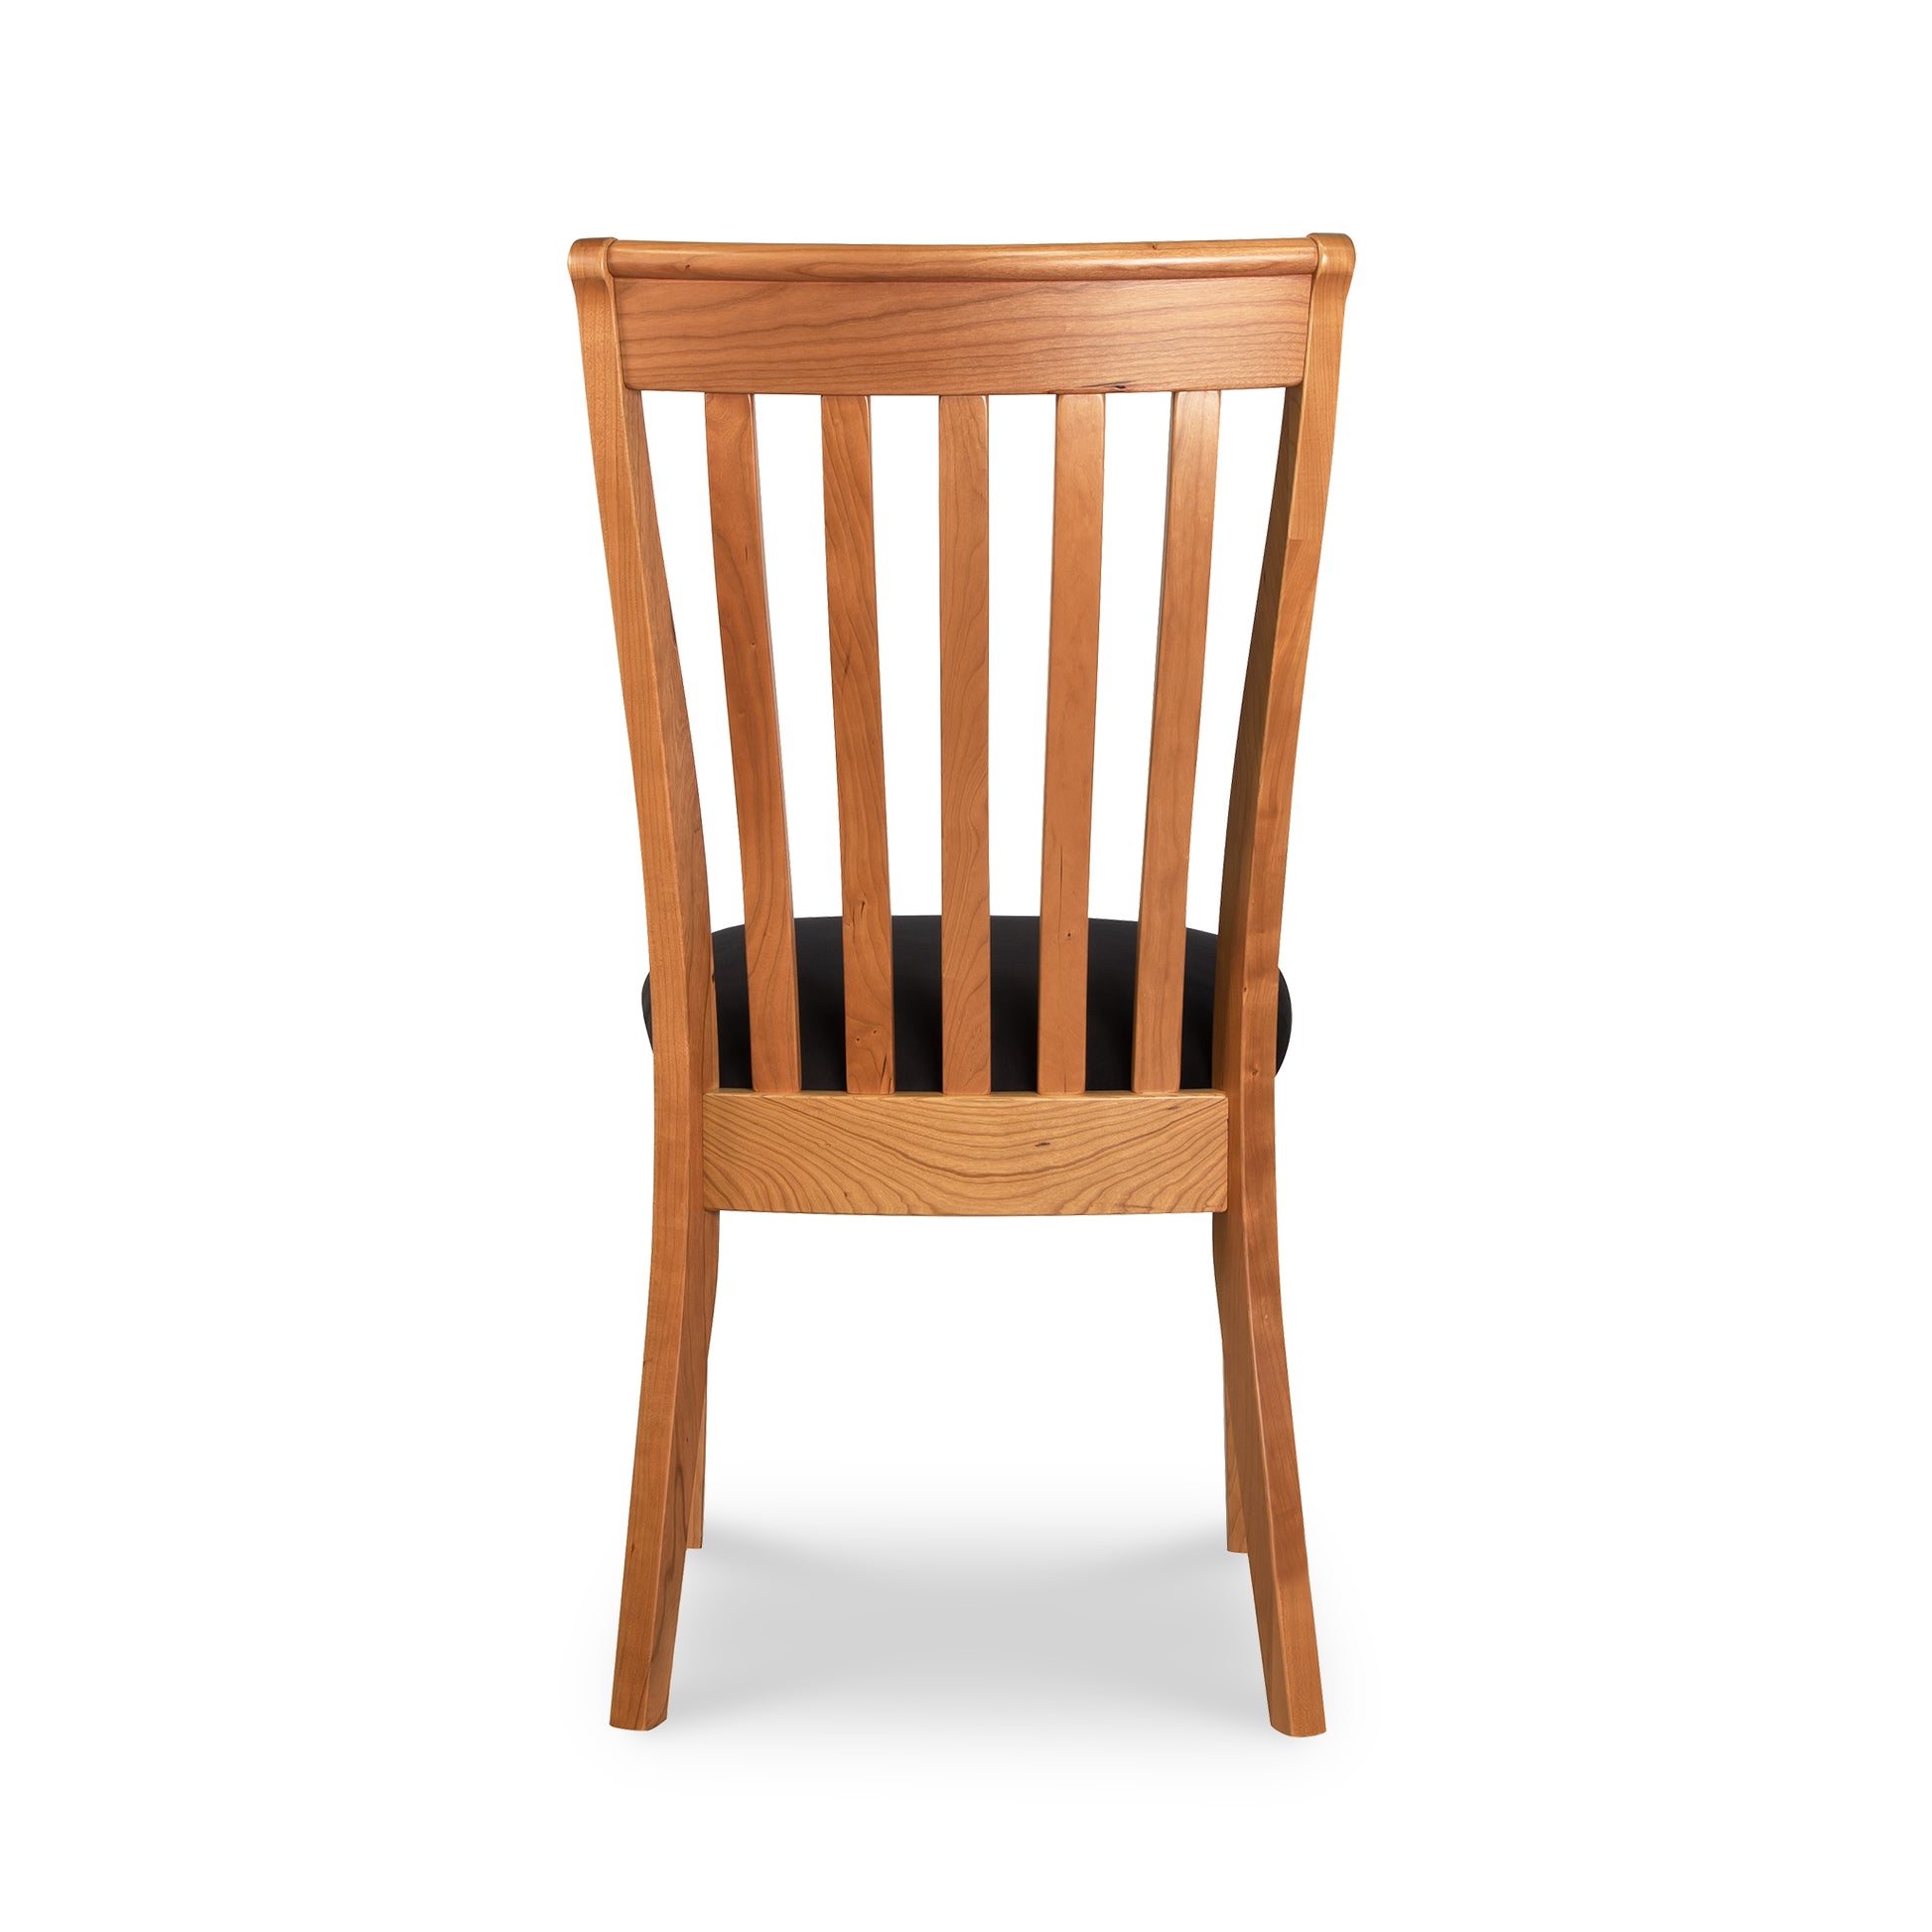 A wooden dining chair with black seat and back.